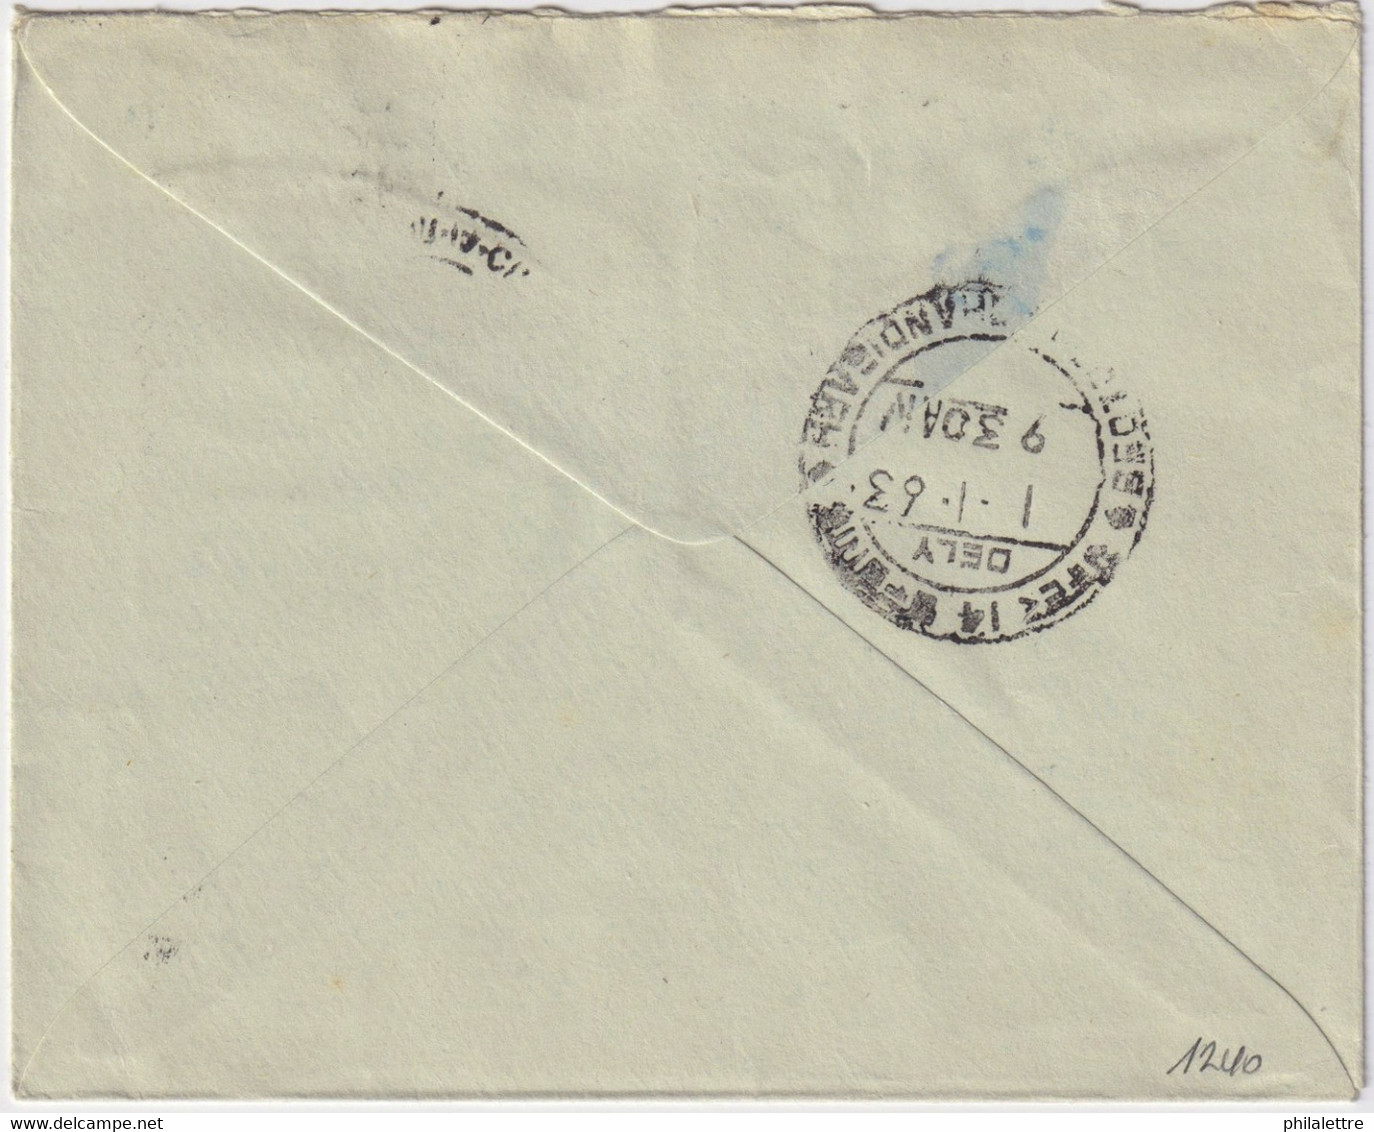 INDE / INDIA - 1962 - Fine Postal Envelope Used Locally In CHANDIGARH - Briefe